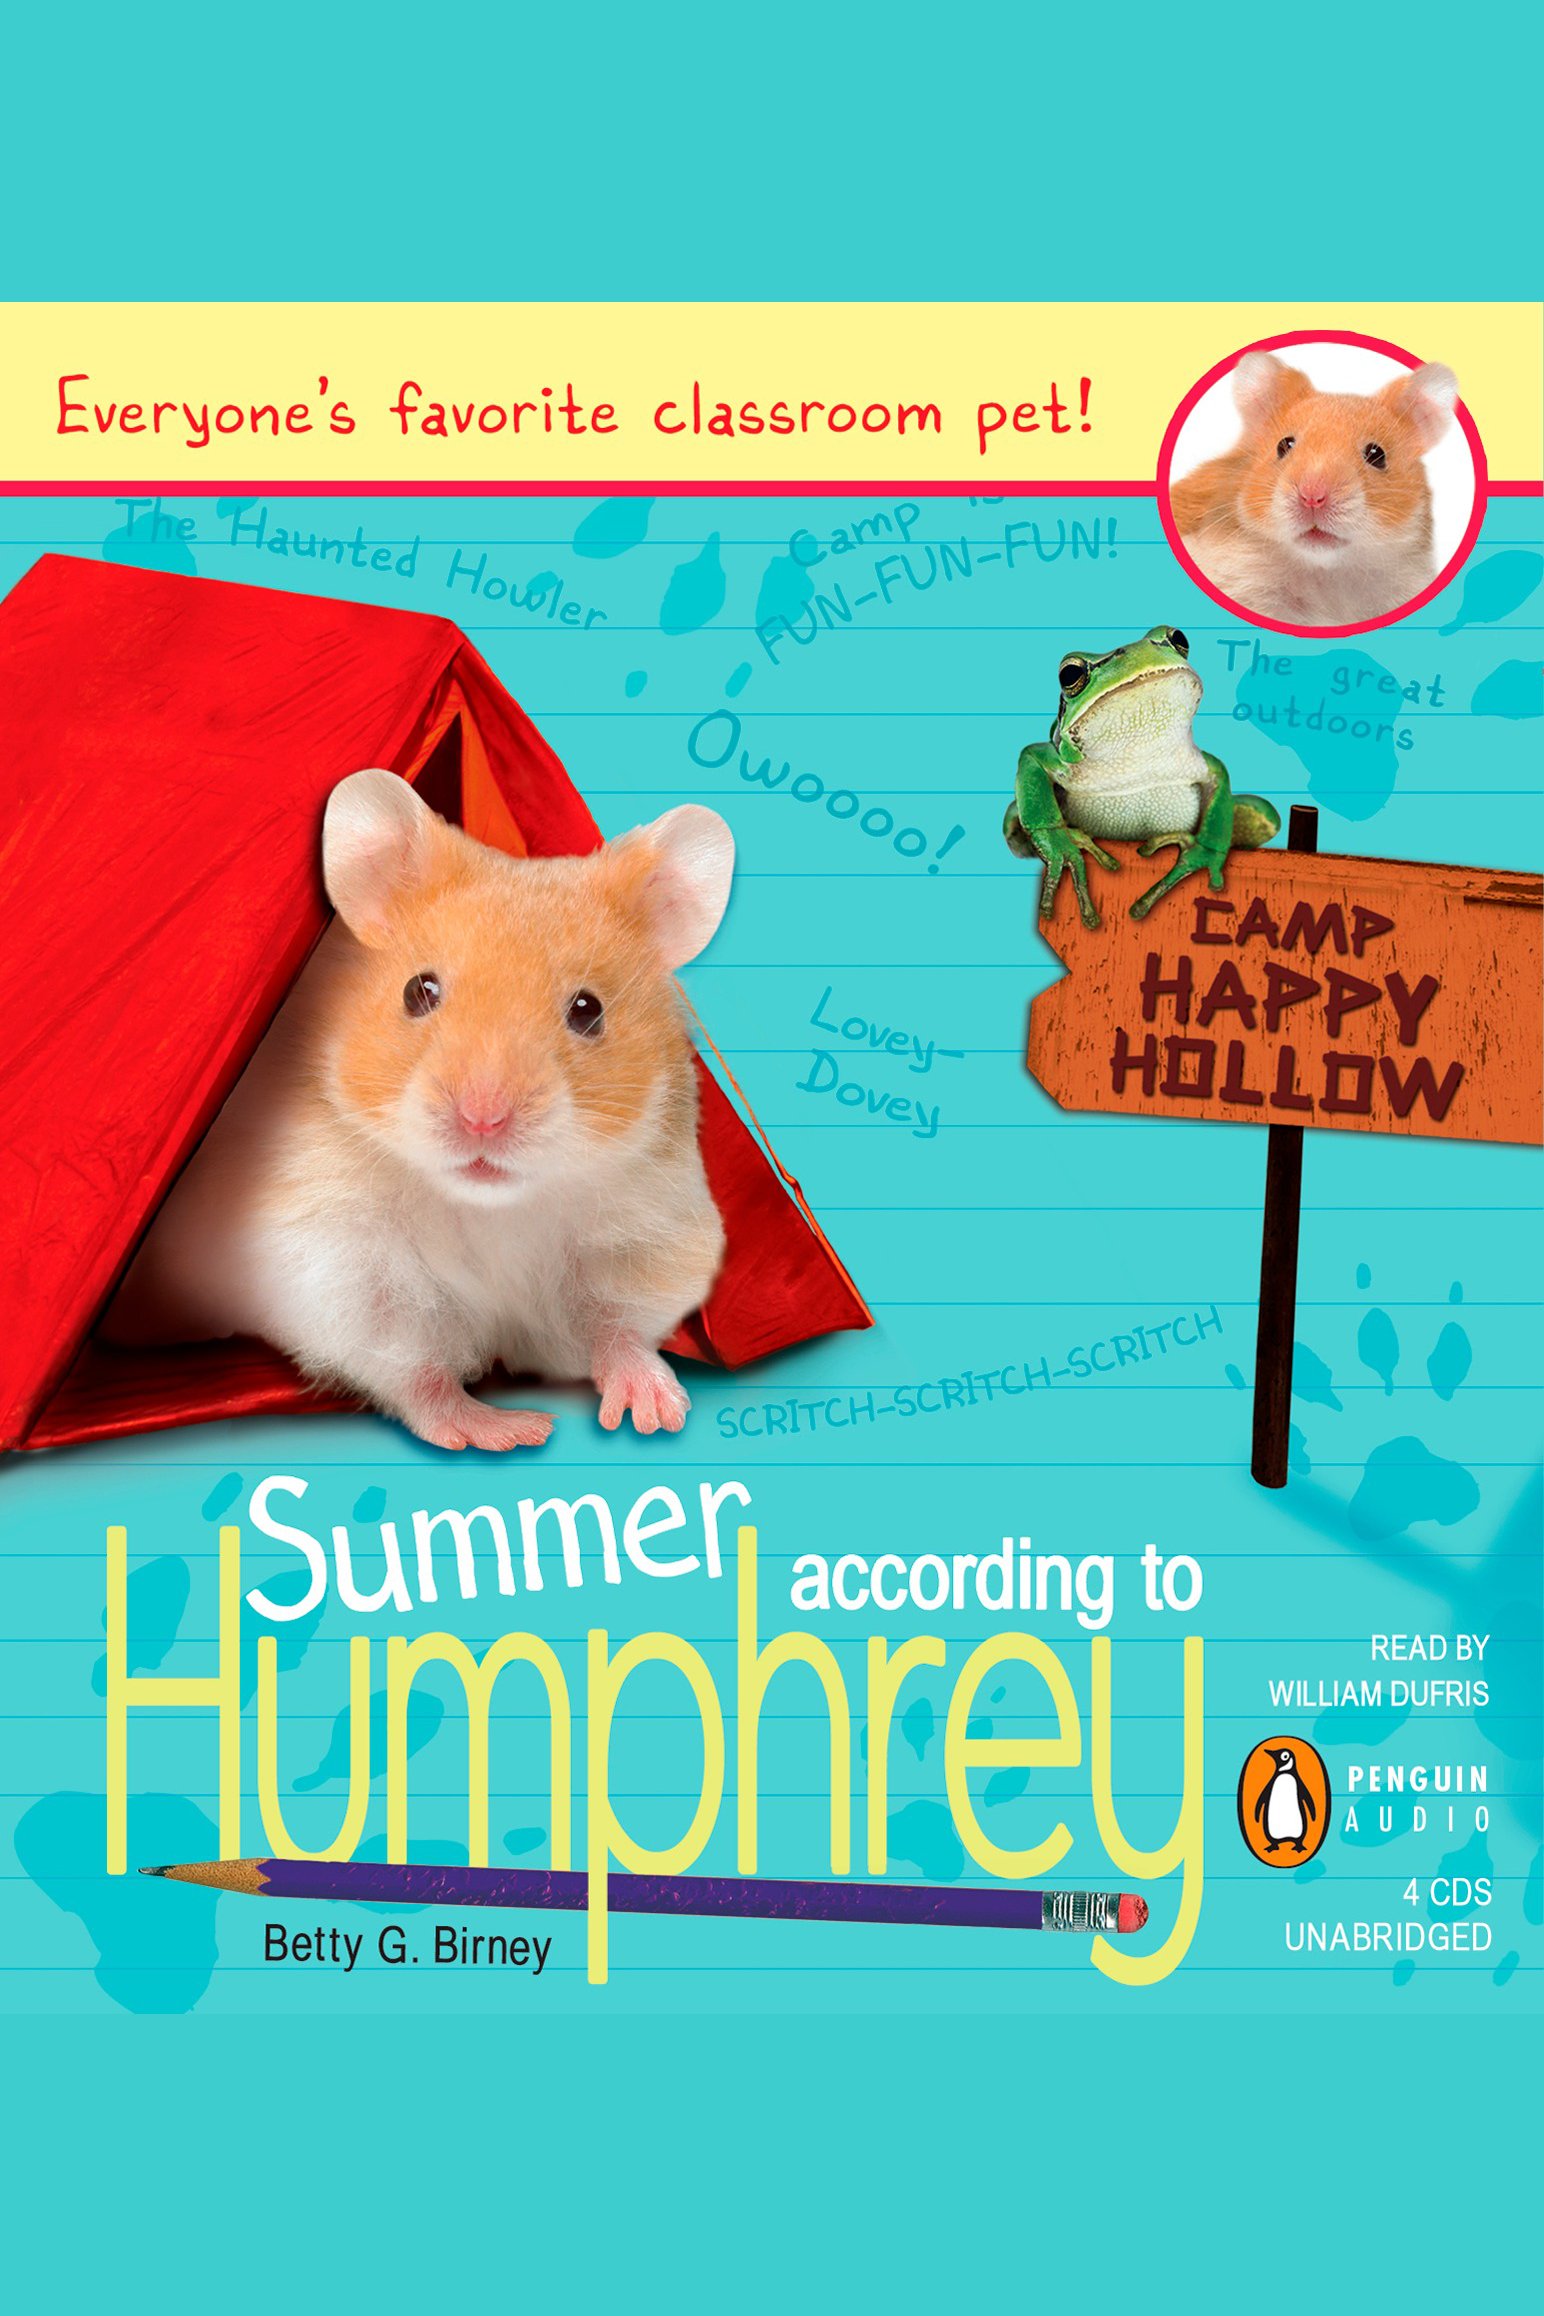 Summer according to Humphrey cover image